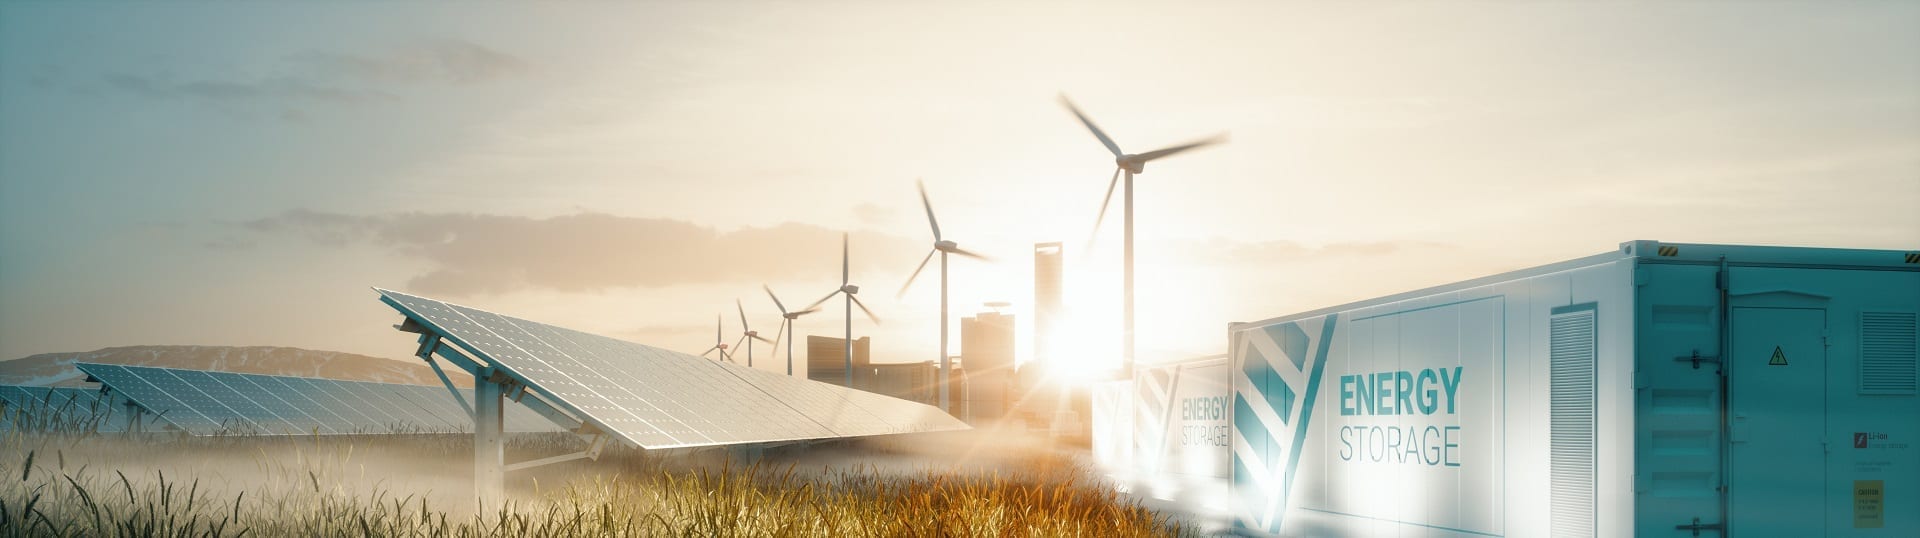 Smart grid renewable energy system solution for future smart cities at sunset. 3d rendering